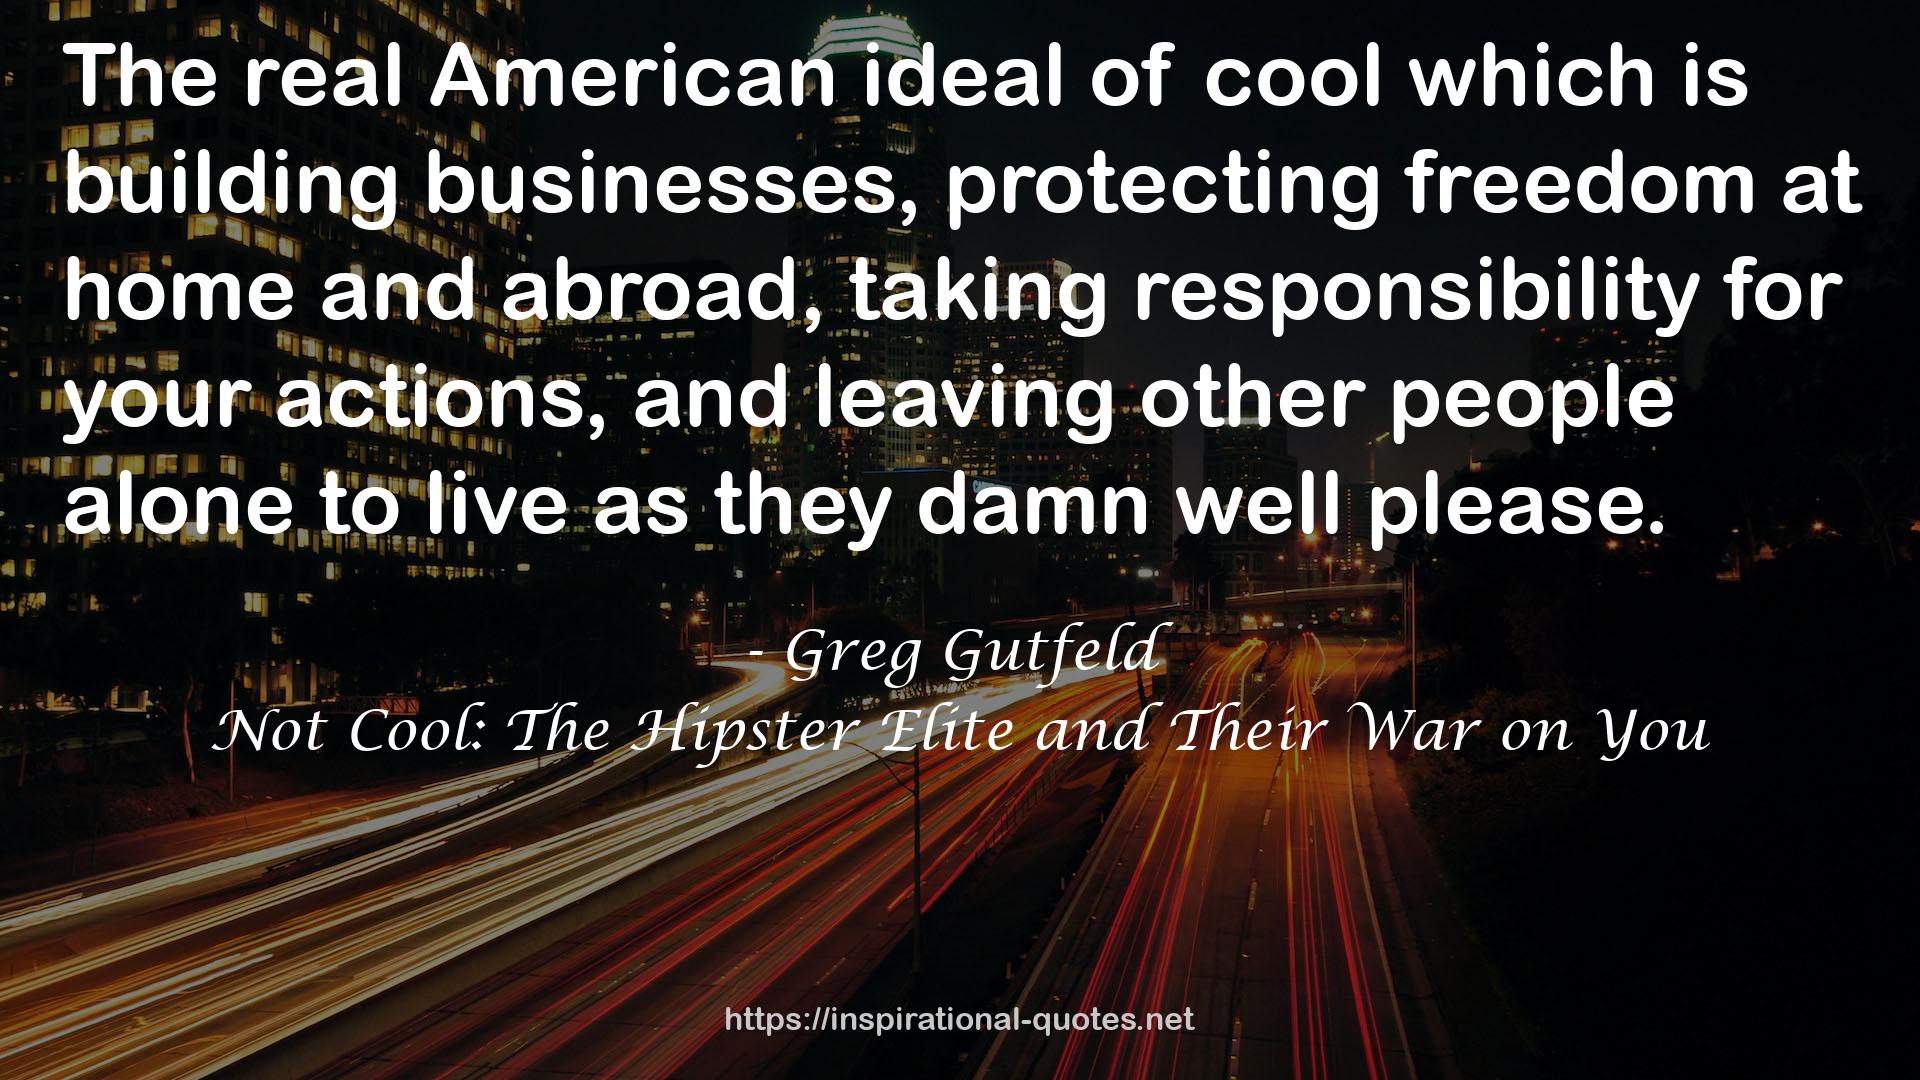 Not Cool: The Hipster Elite and Their War on You QUOTES